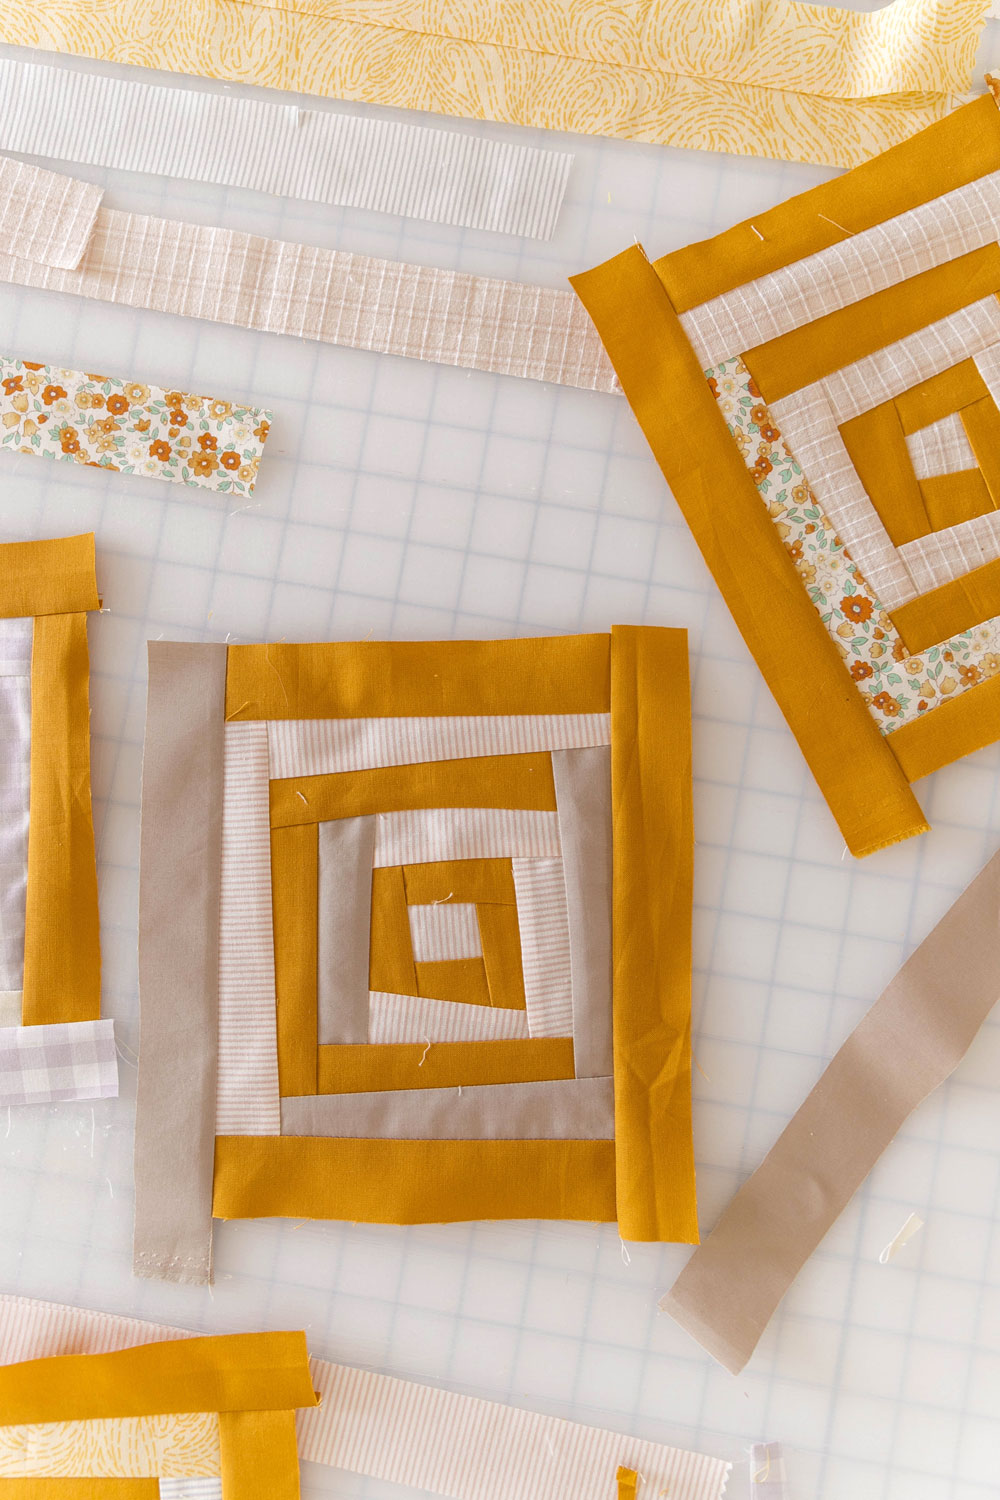 In Weeks 3 and 4 of the Shining Star quilt sew along we make the center units—improv log cabins. They are so cute and fun! Join me!! suzyquilts.com